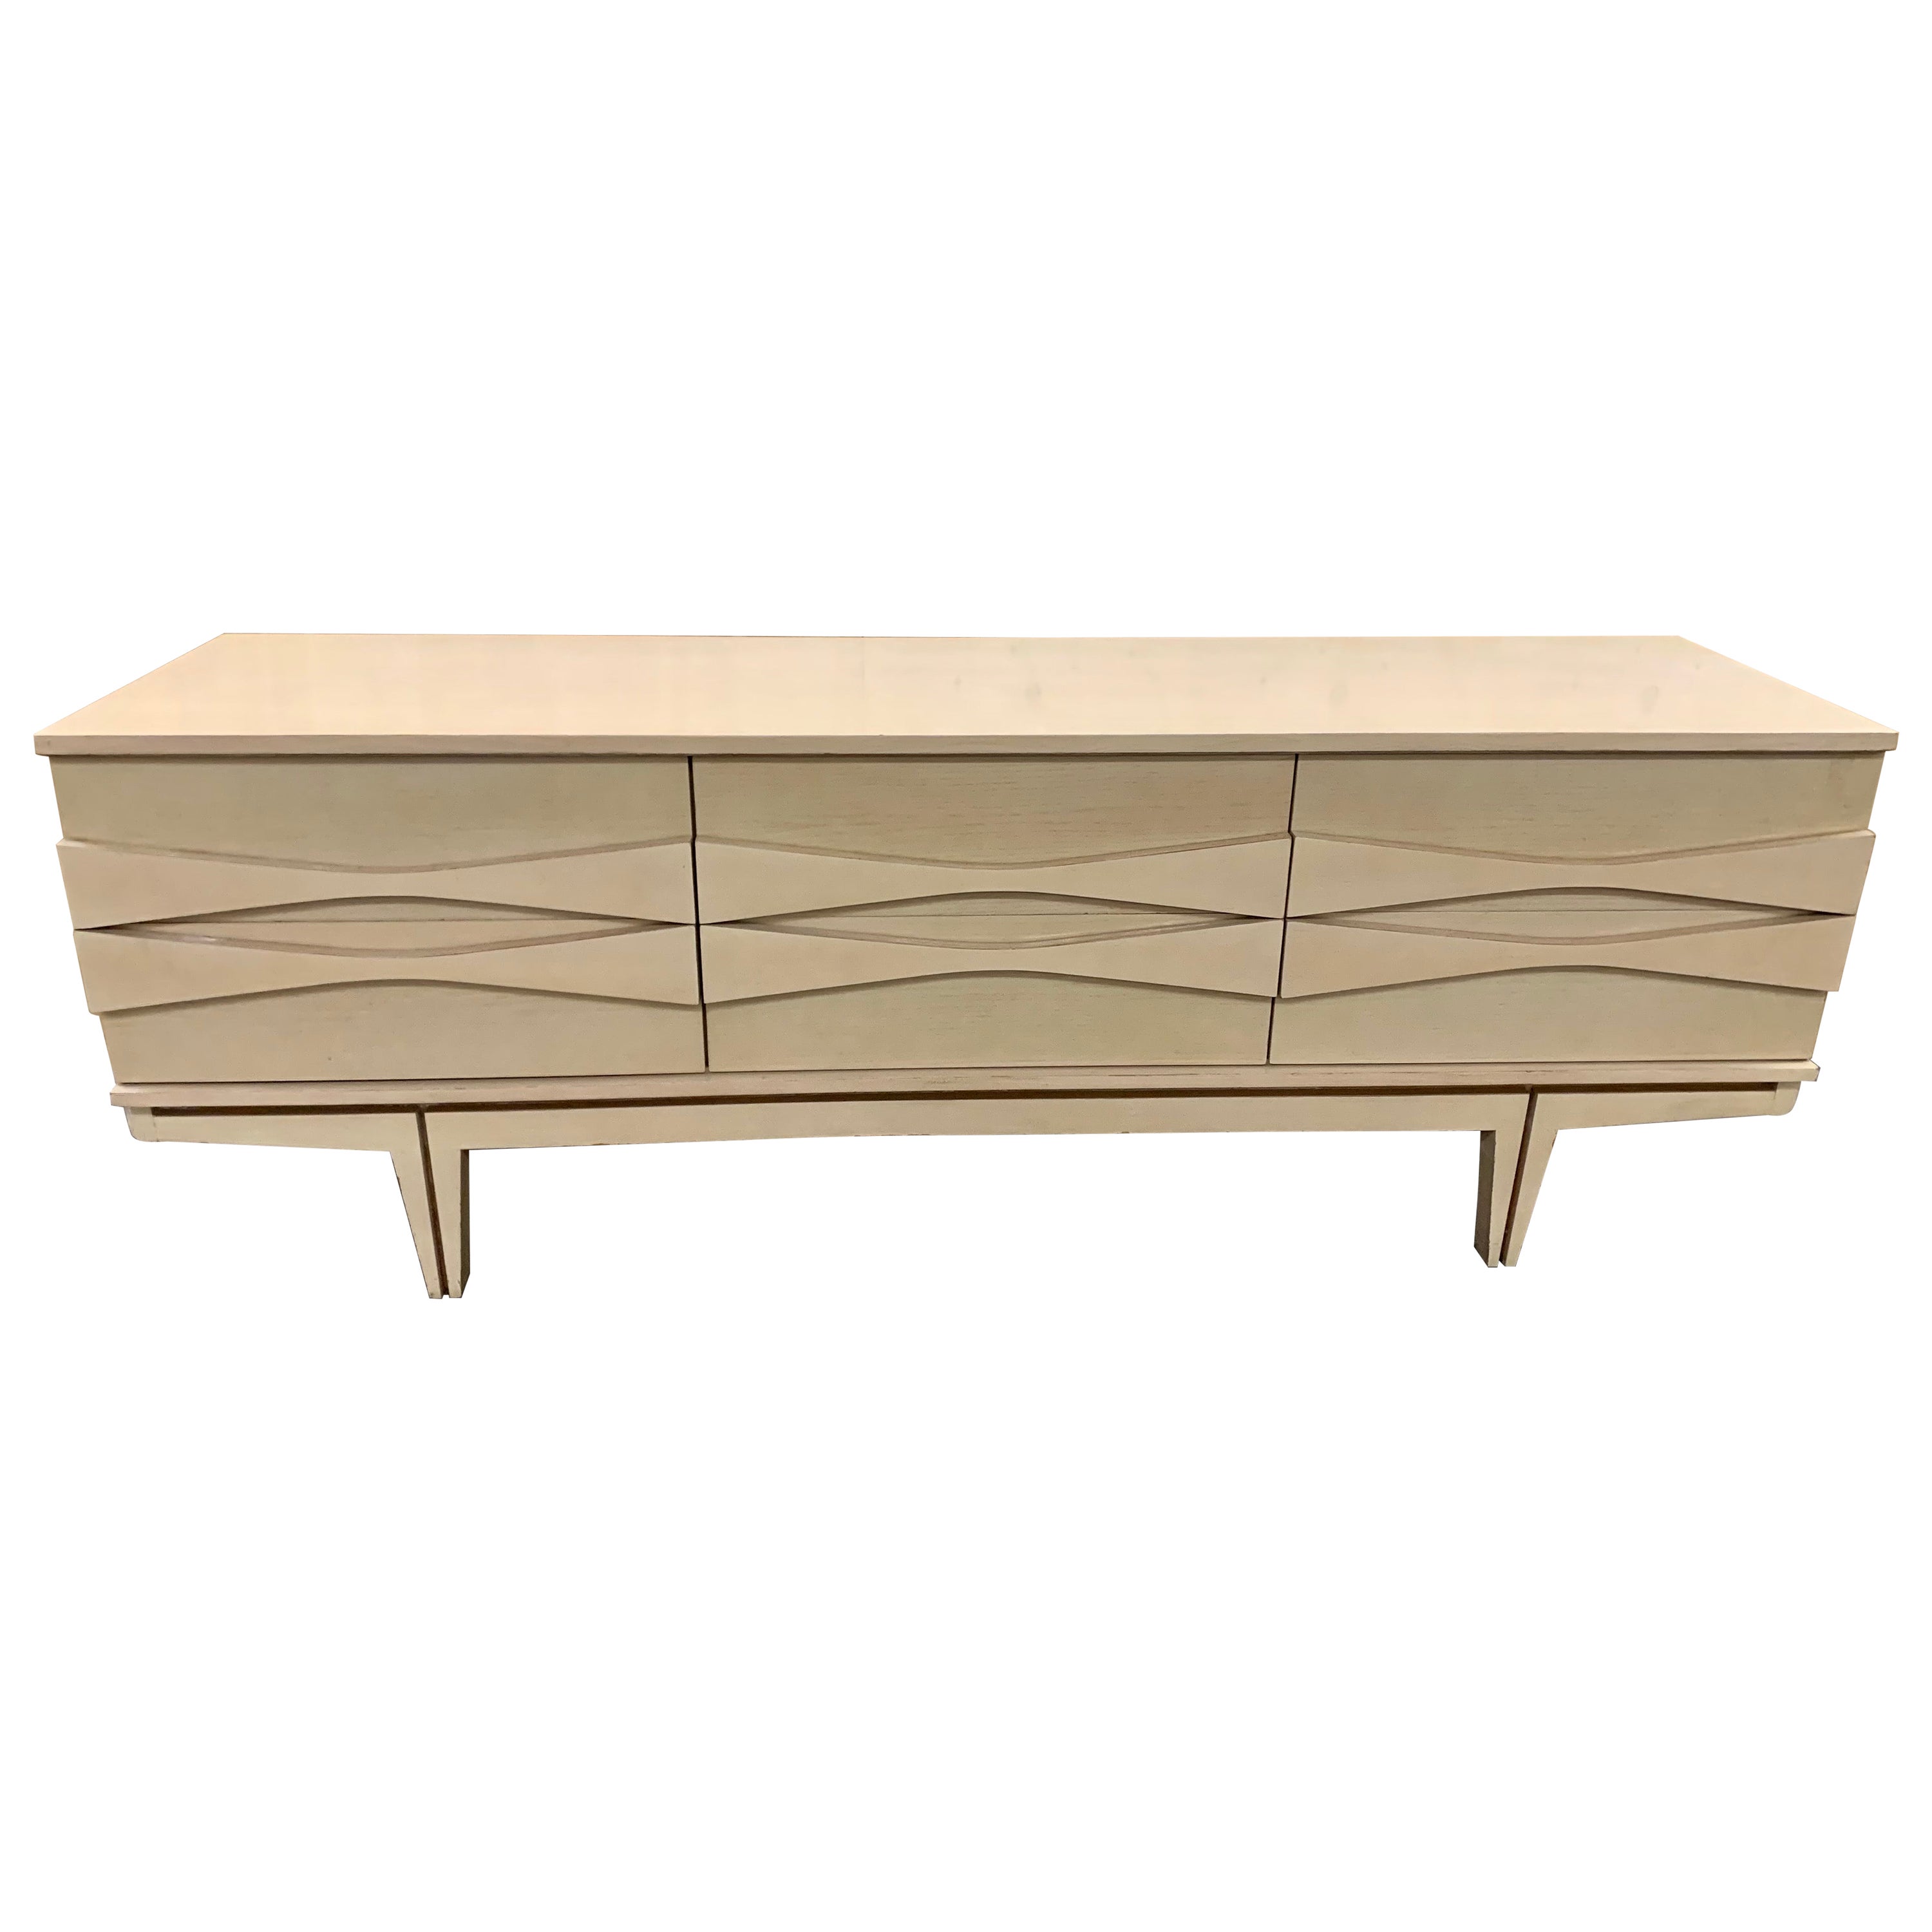 Supercool Mid Century Modern French 1960s credenza or sideboard with eggshell/beige high gloss lacqured 